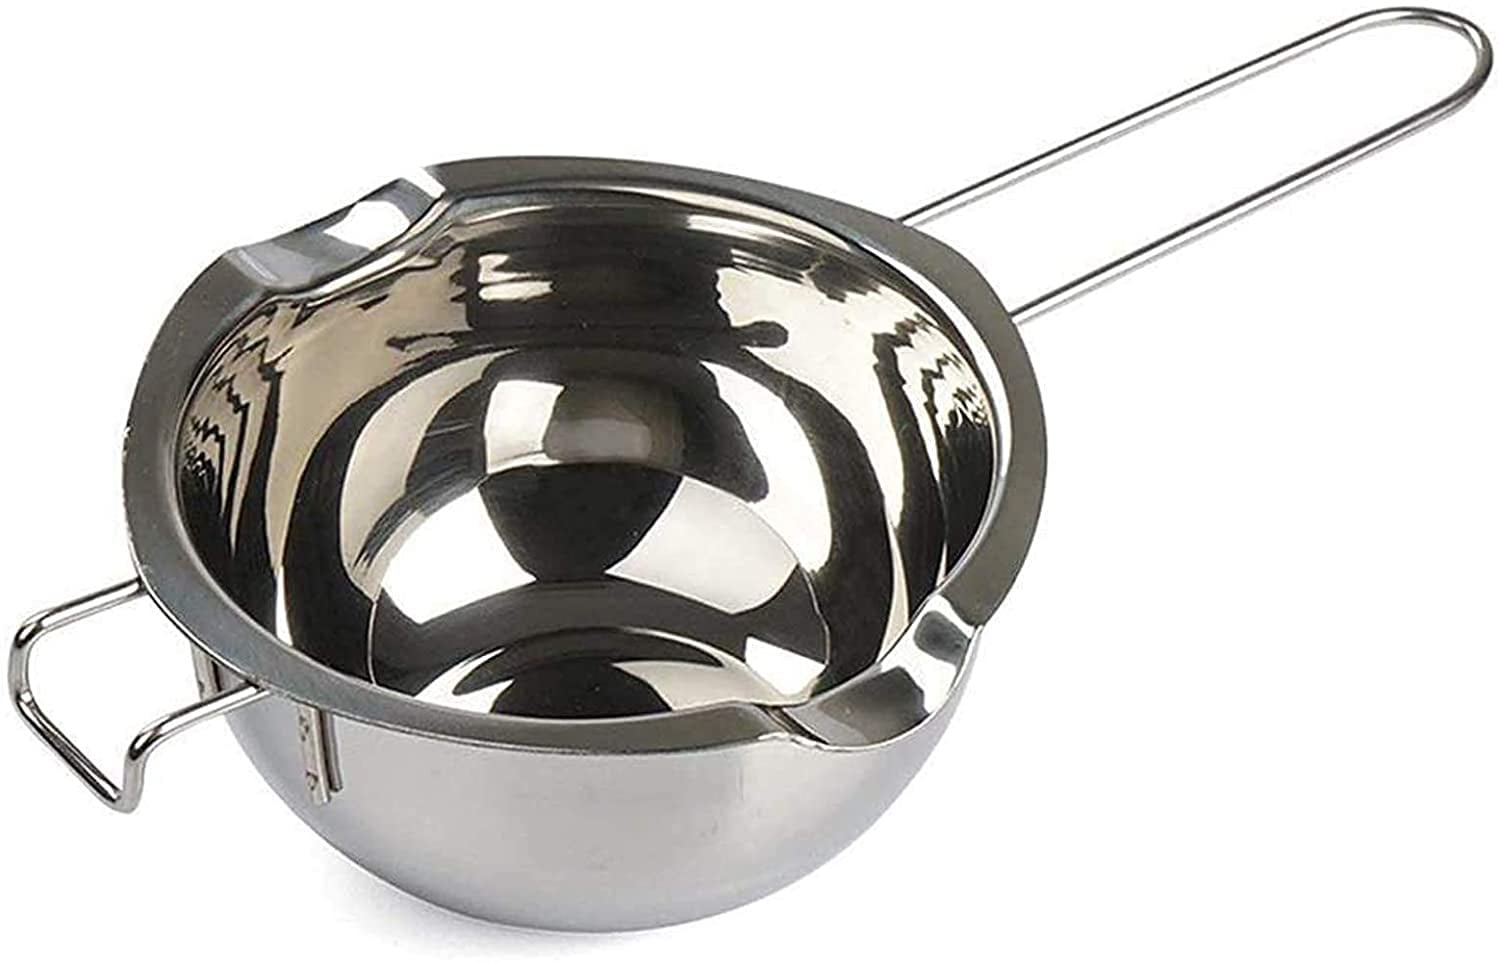 Waymeduo Double Boiler Insert Double Spouts Melted Butter Chocolate Cheese Caramel Heat-Resistant Handle Flat Bottom 18 8 Stainless Steel Universal Melting Pot Red Handle 